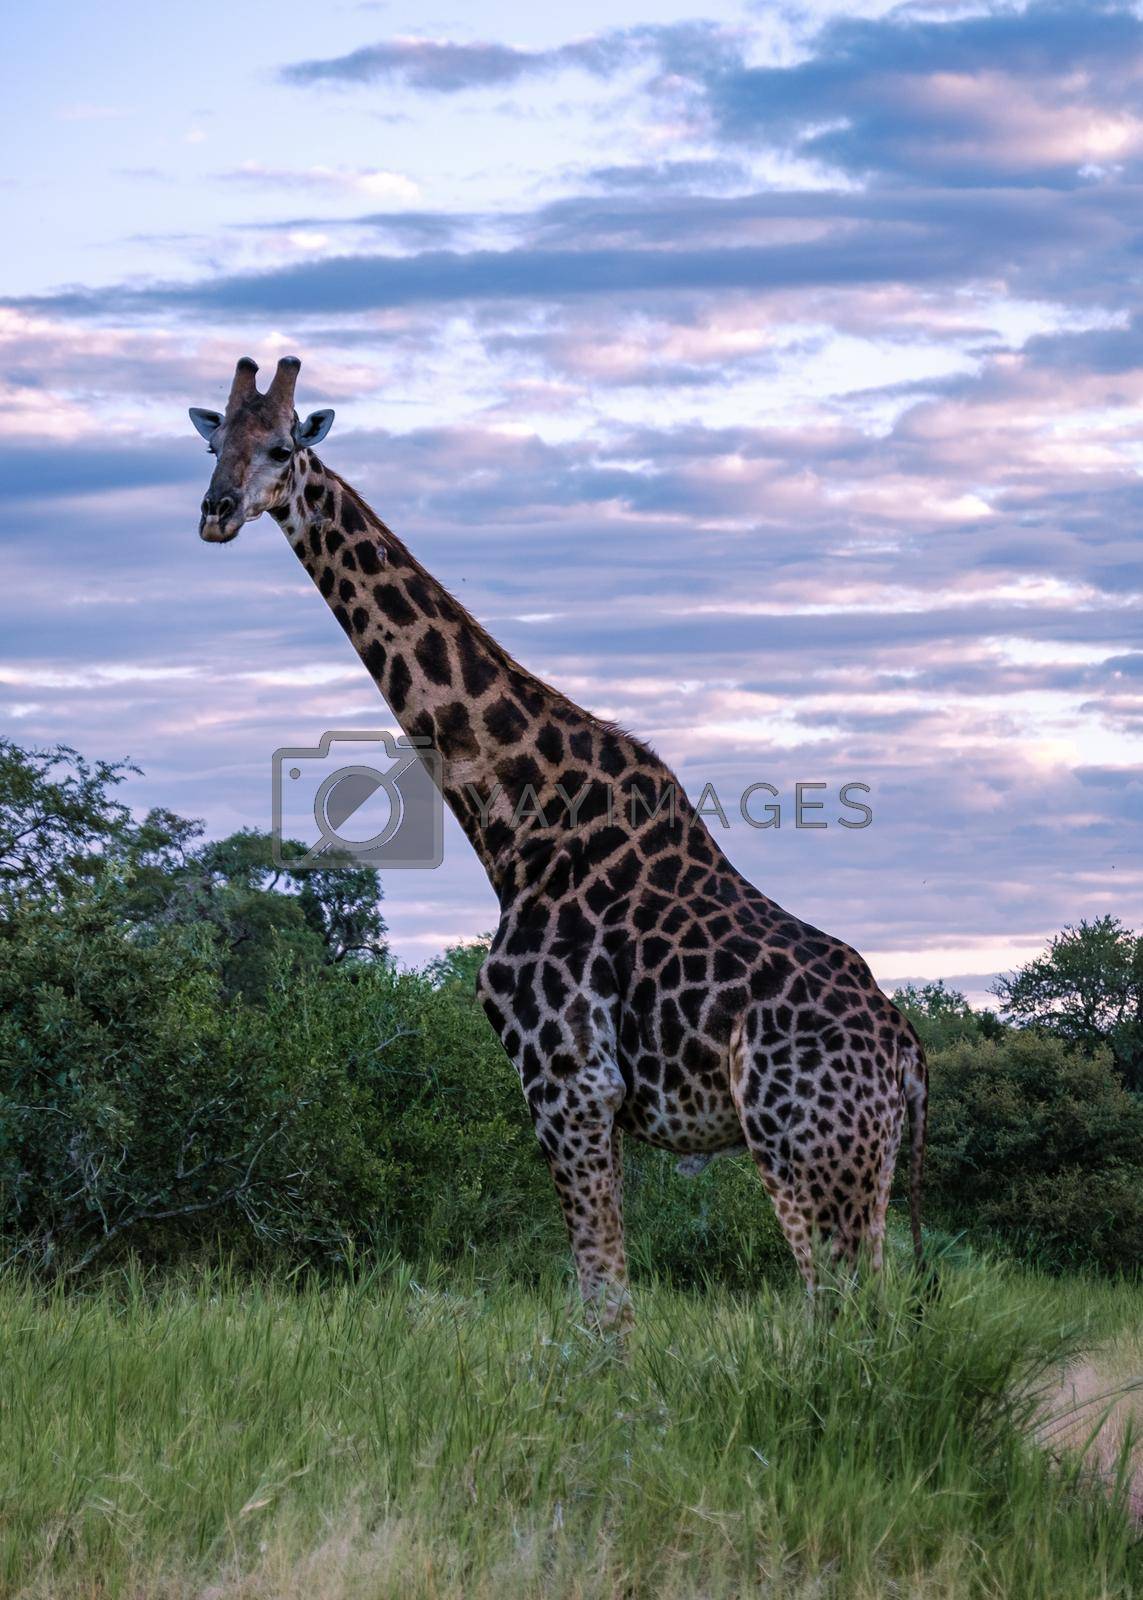 Royalty free image of Giraffe at a Savannah landscape during sunset in South Africa at The Klaserie Private Nature Reserve inside the Kruger national park South Africa by fokkebok